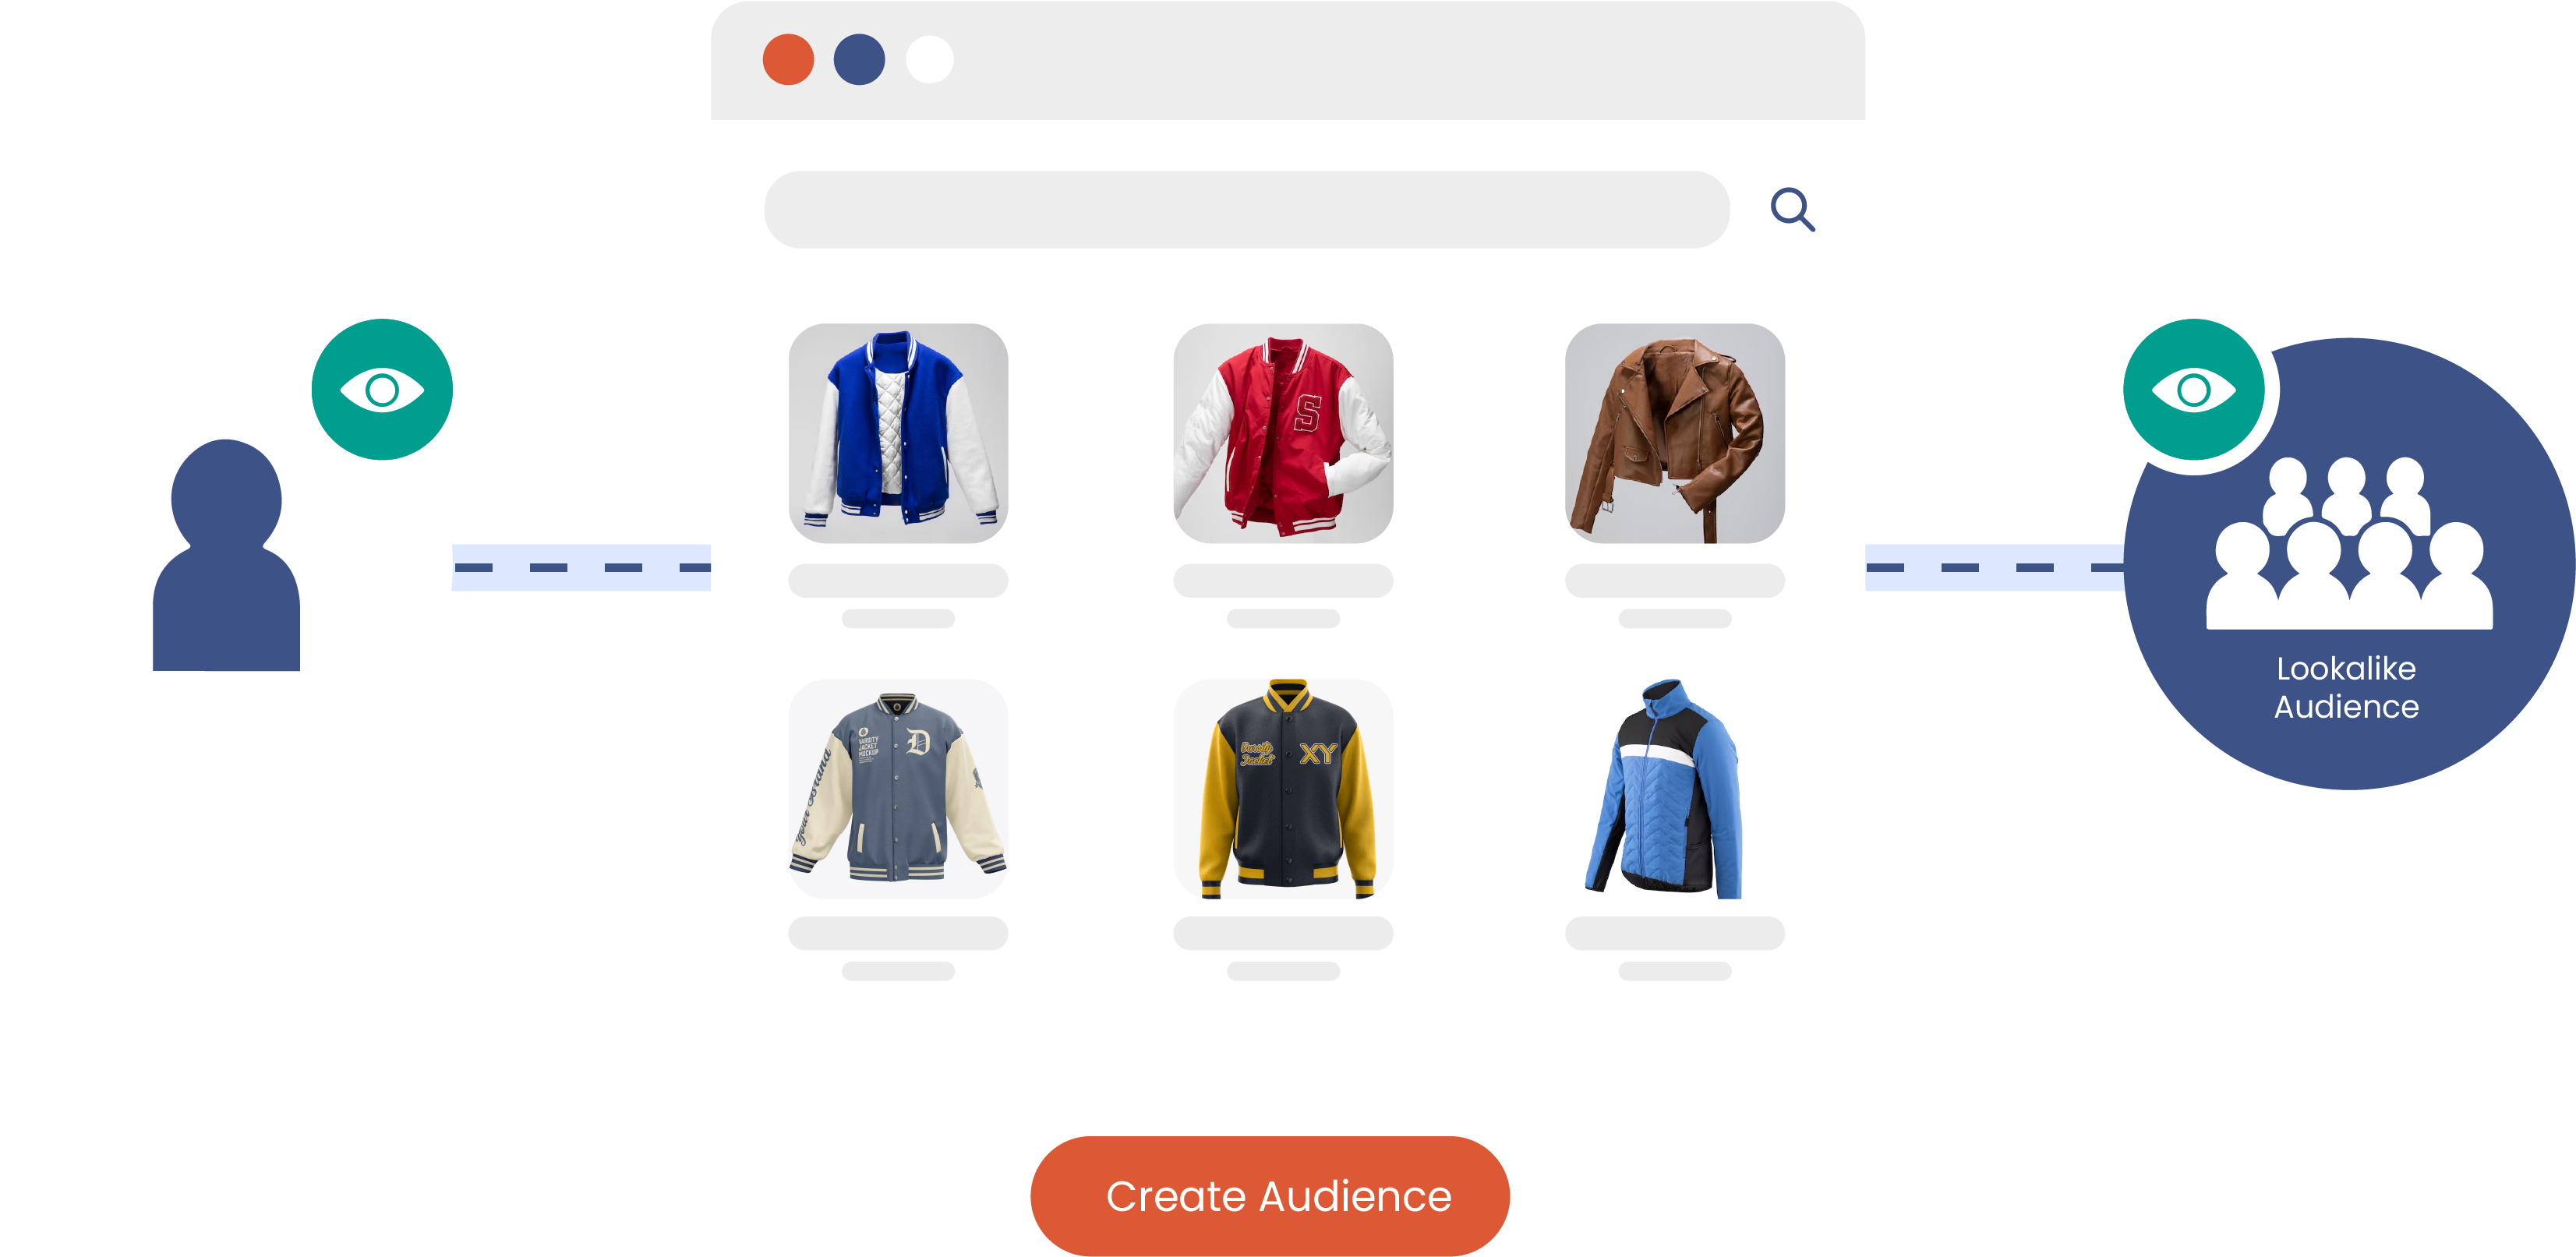 Category-based Audiences